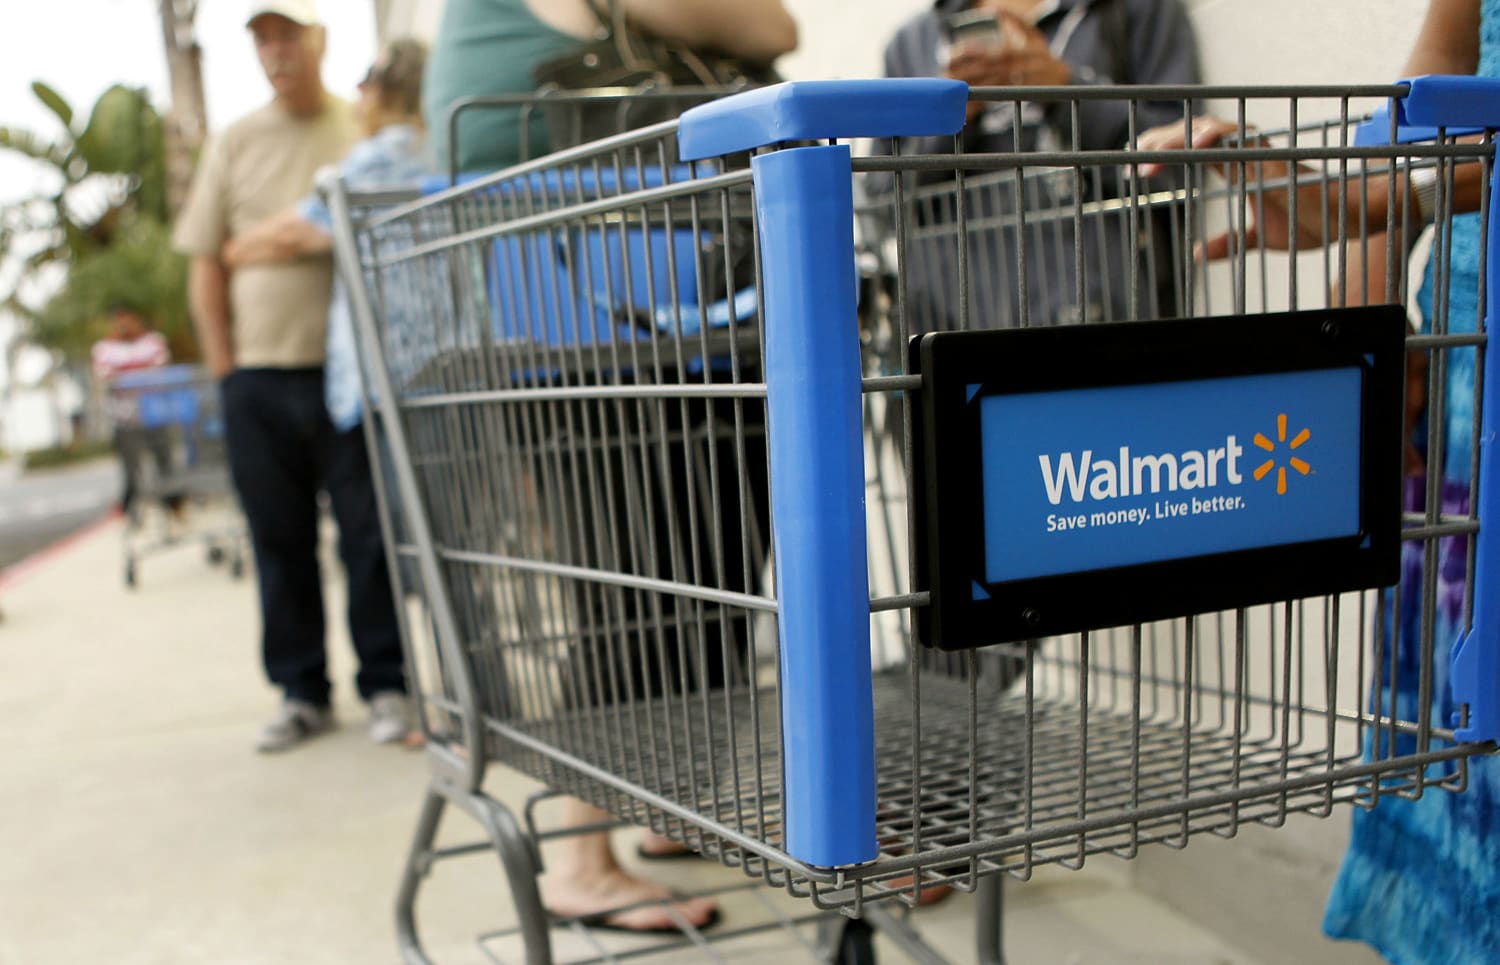 If you invested $1,000 in Walmart in 2009, here's how much money you'd have now